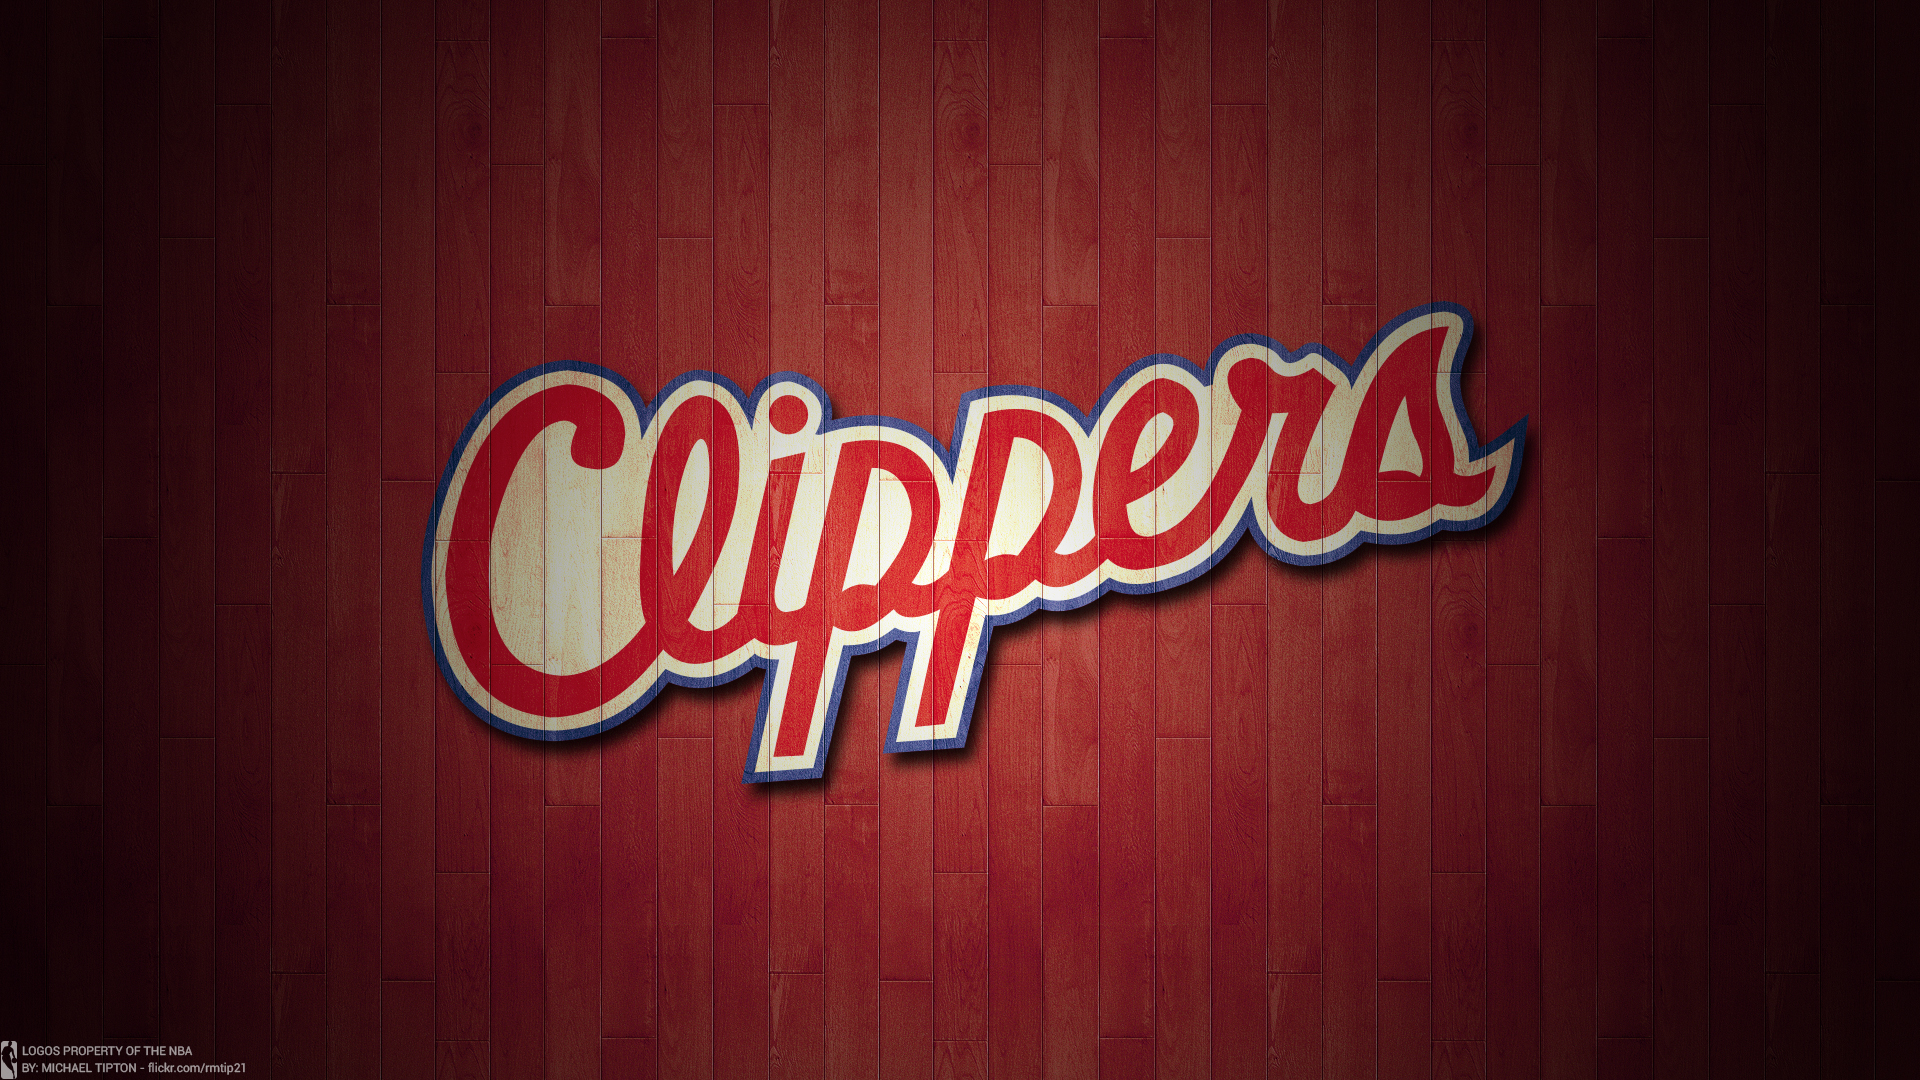 Los Angeles Clippers HD Wallpaper Background Image